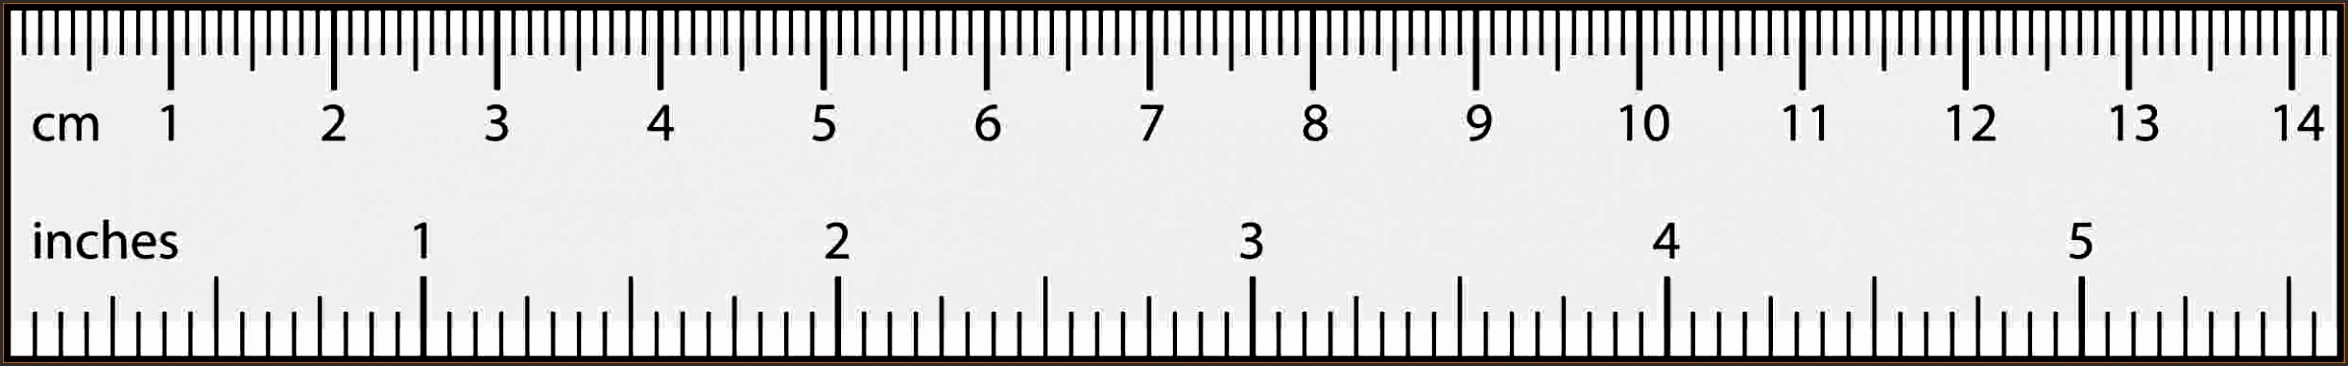 How to Measure My P.D. for Eyeglasses